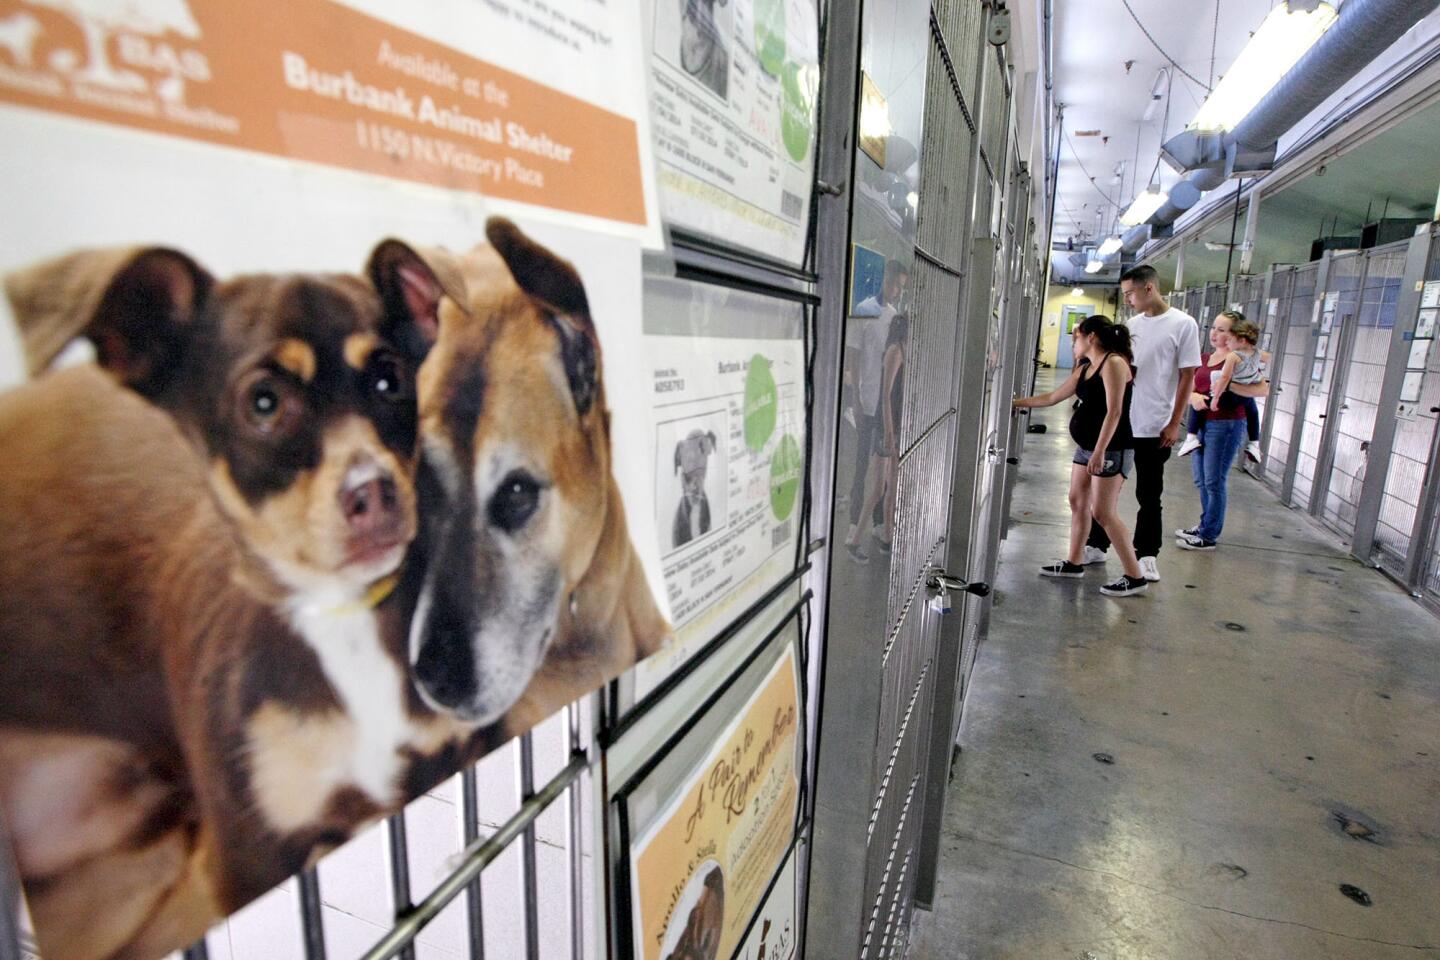 Photo Gallery: Clear the Shelters adoption event on August 15